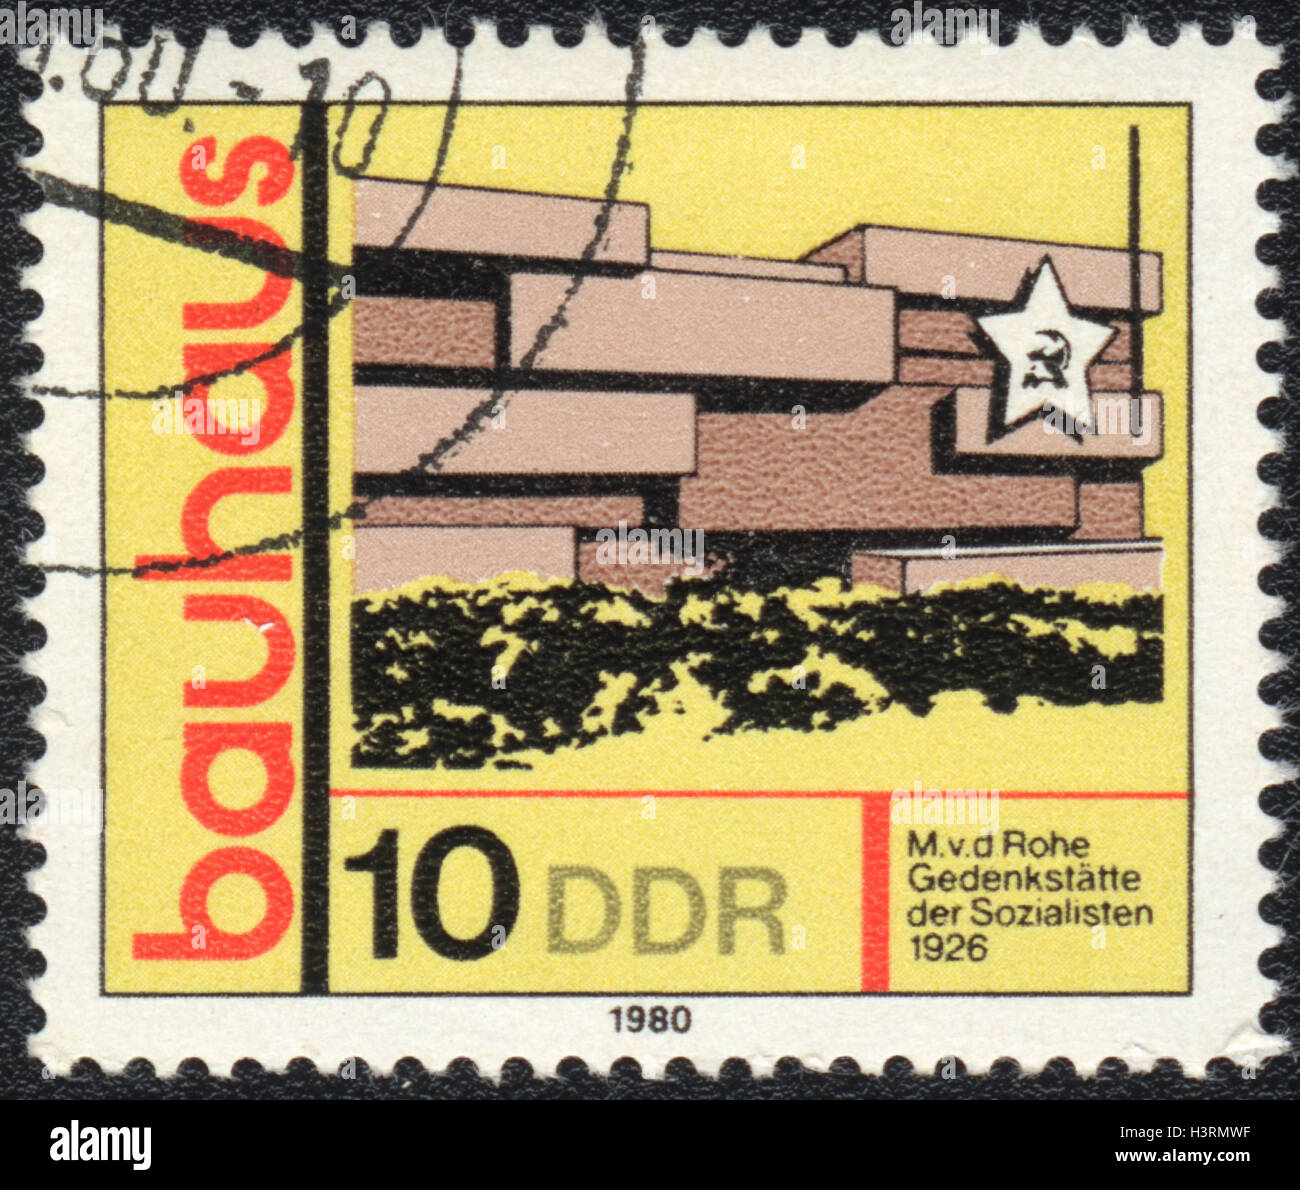 A postage stamp printed in DDR Germany,  shows Memorial of Socialists, Bauhaus school, 1980 Stock Photo